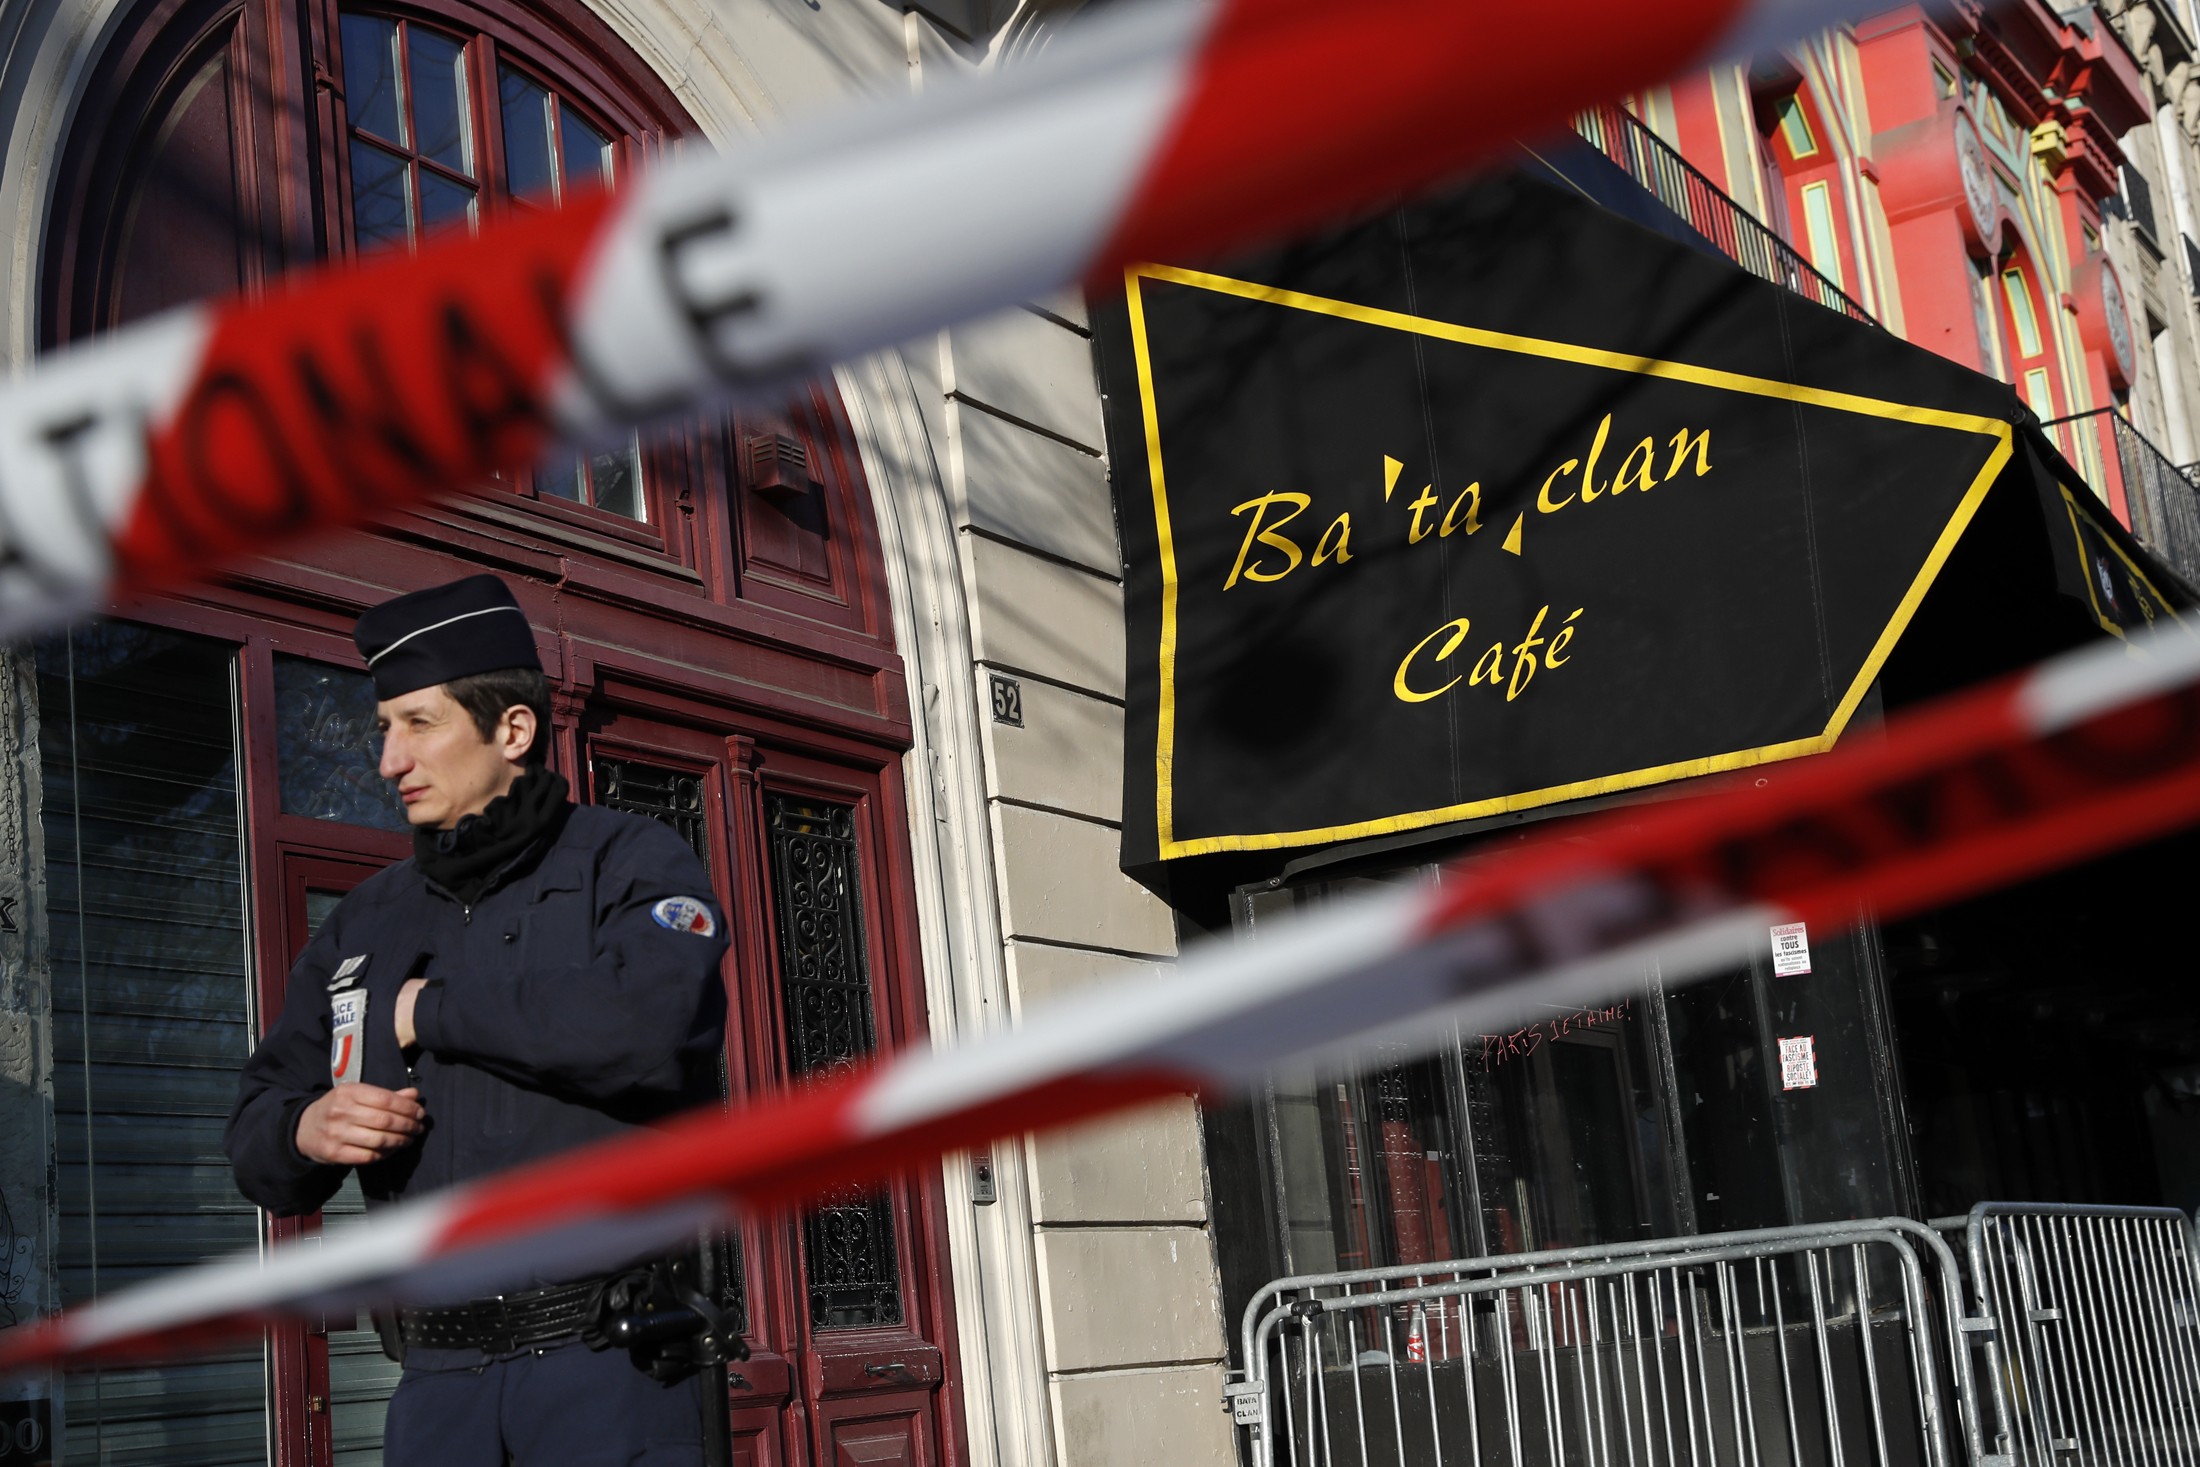 Photo: Photo: French police block the access to the Bataclan concert hall before the visit of members of a French parliamentary committee investigating government measures to fight shooting and bombing attacks at the site four months after a series of attacks at several sites in Paris, France, March 17, 2016. Credit: REUTERS/Benoit Tessier TPX IMAGES OF THE DAYFrench police block the access to the Bataclan concert hall before the visit of members of a French parliamentary committee investigating government measures to fight shooting and bombing attacks at the site four months after a series of attacks at several sites in Paris, France, March 17, 2016. REUTERS/Benoit Tessier TPX IMAGES OF THE DAY